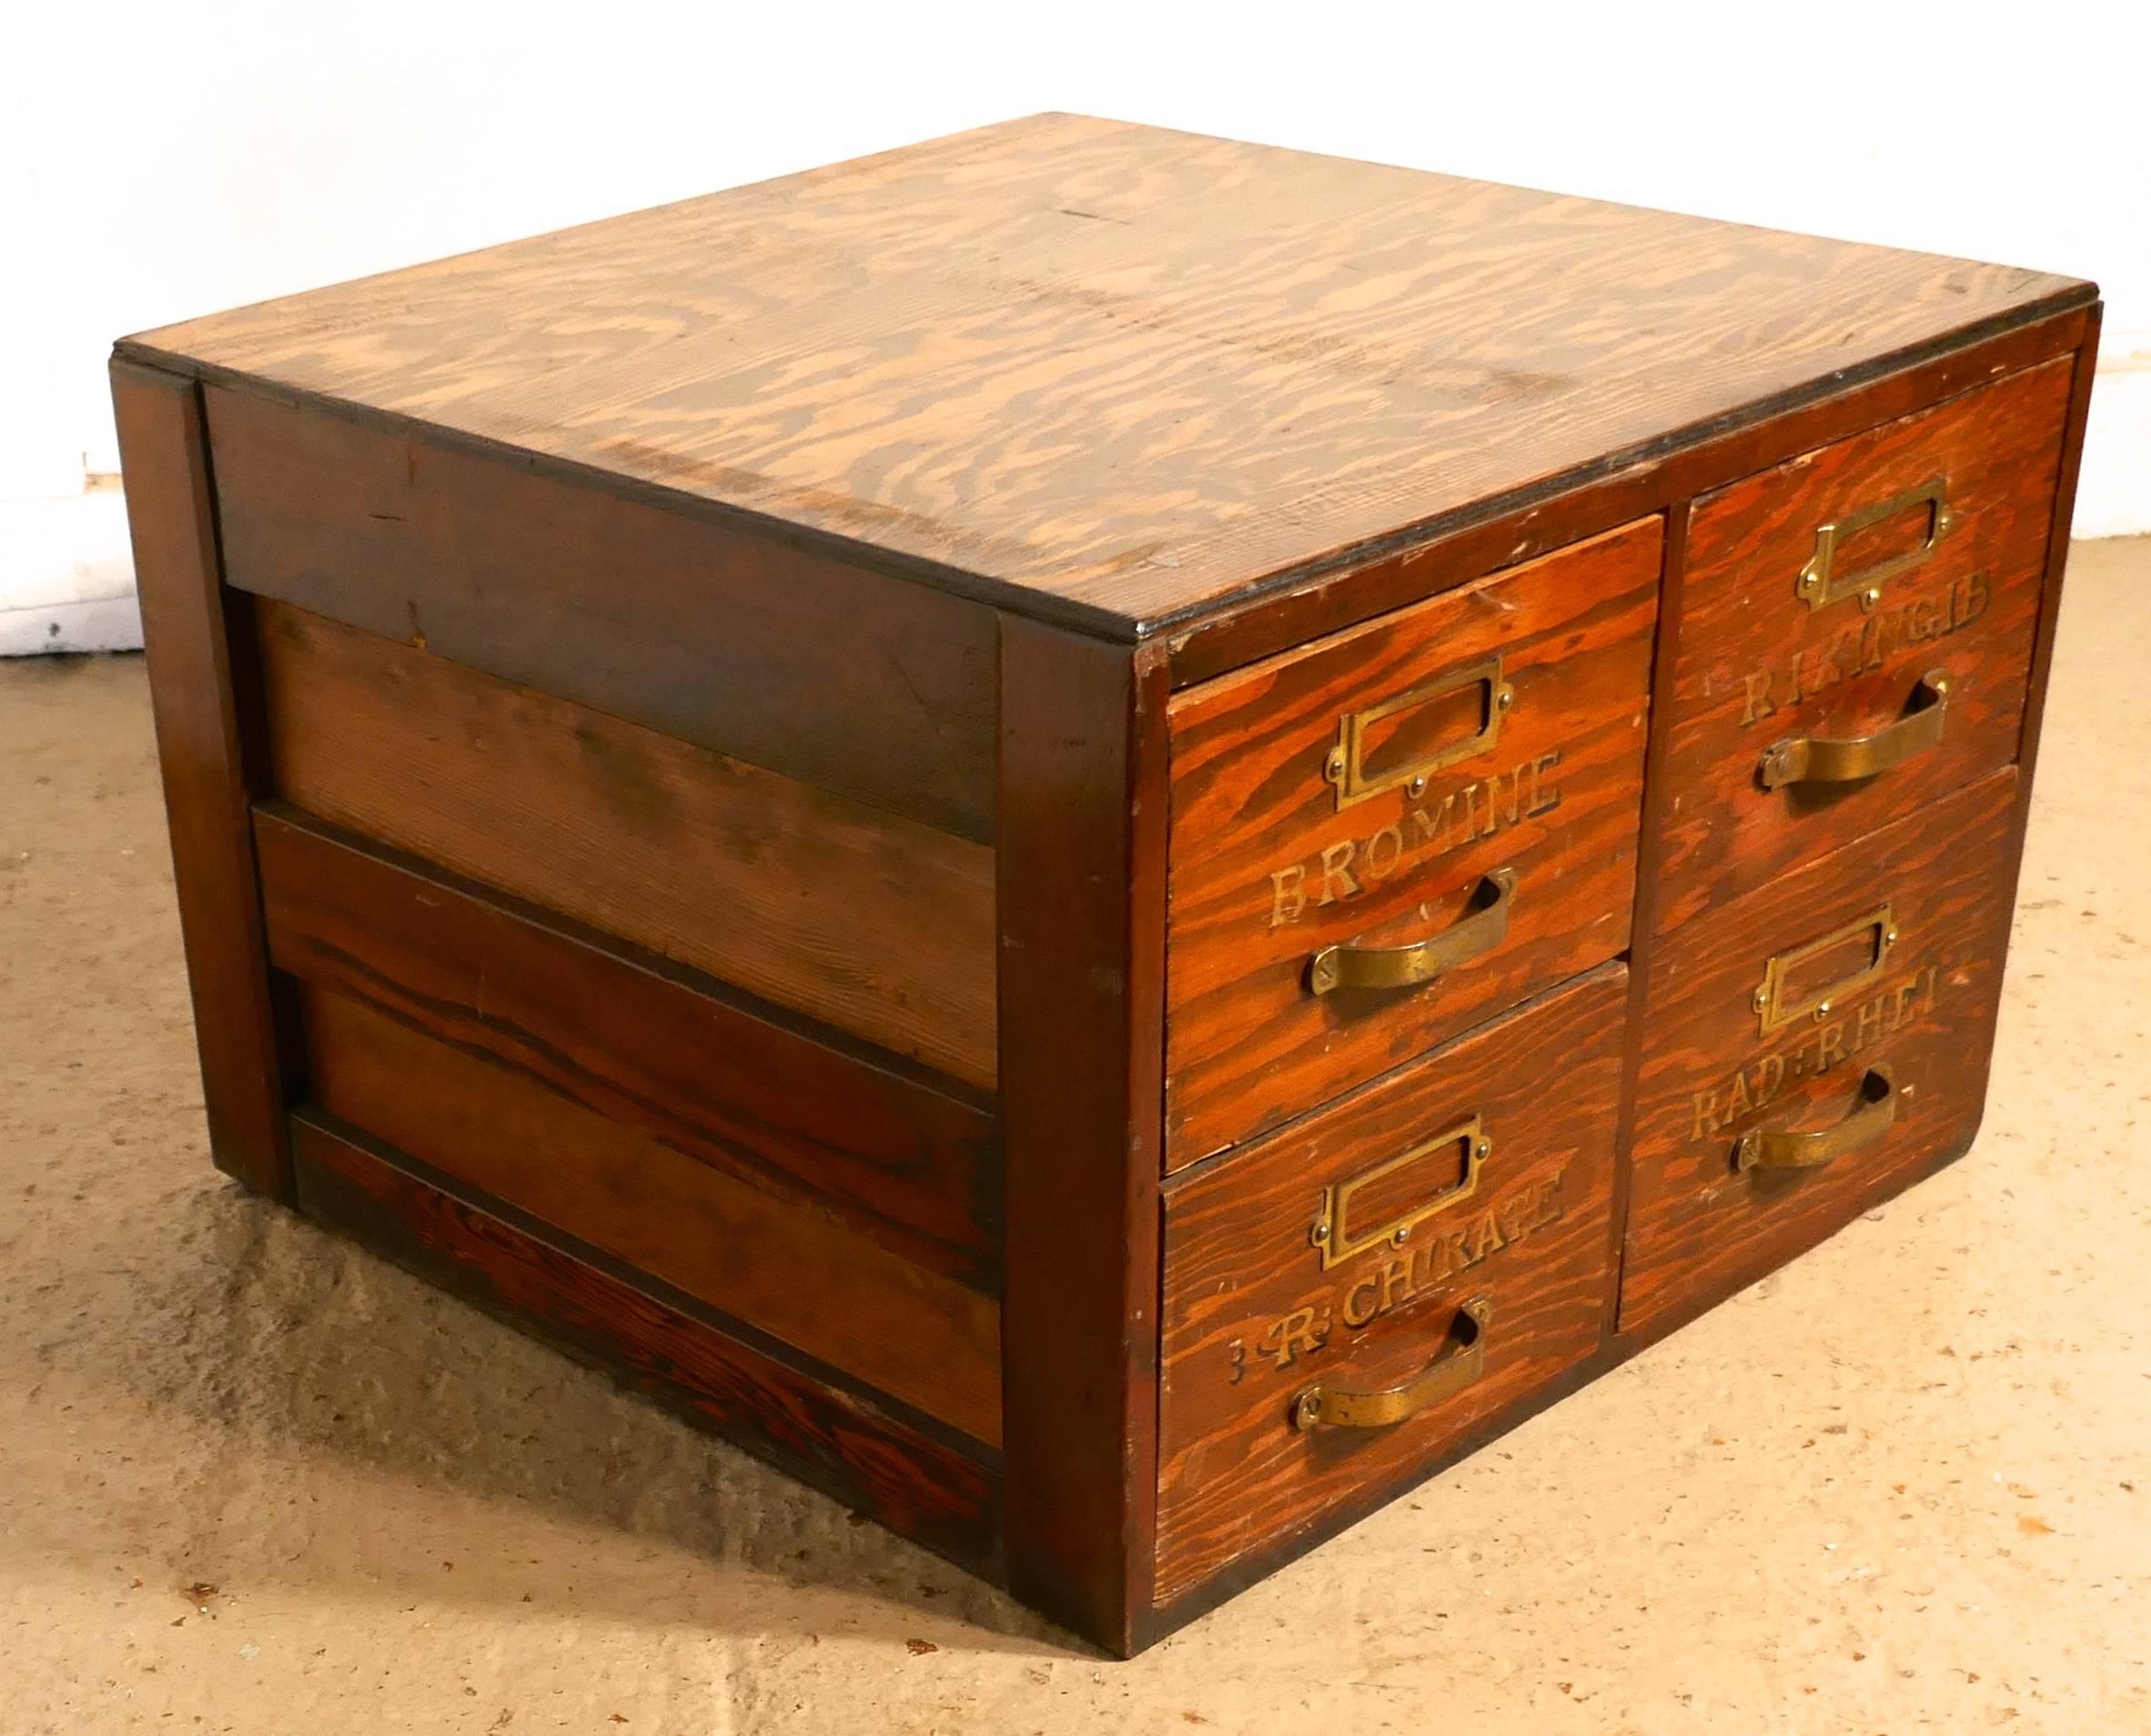 Filing cabinet, chemist drawers with gold lettering, coffee tables.

This attractive cube has four drawers, on the front of each drawer there is a brass handle and lable holder also the name of the intended contents painted in gold.
The cabinet